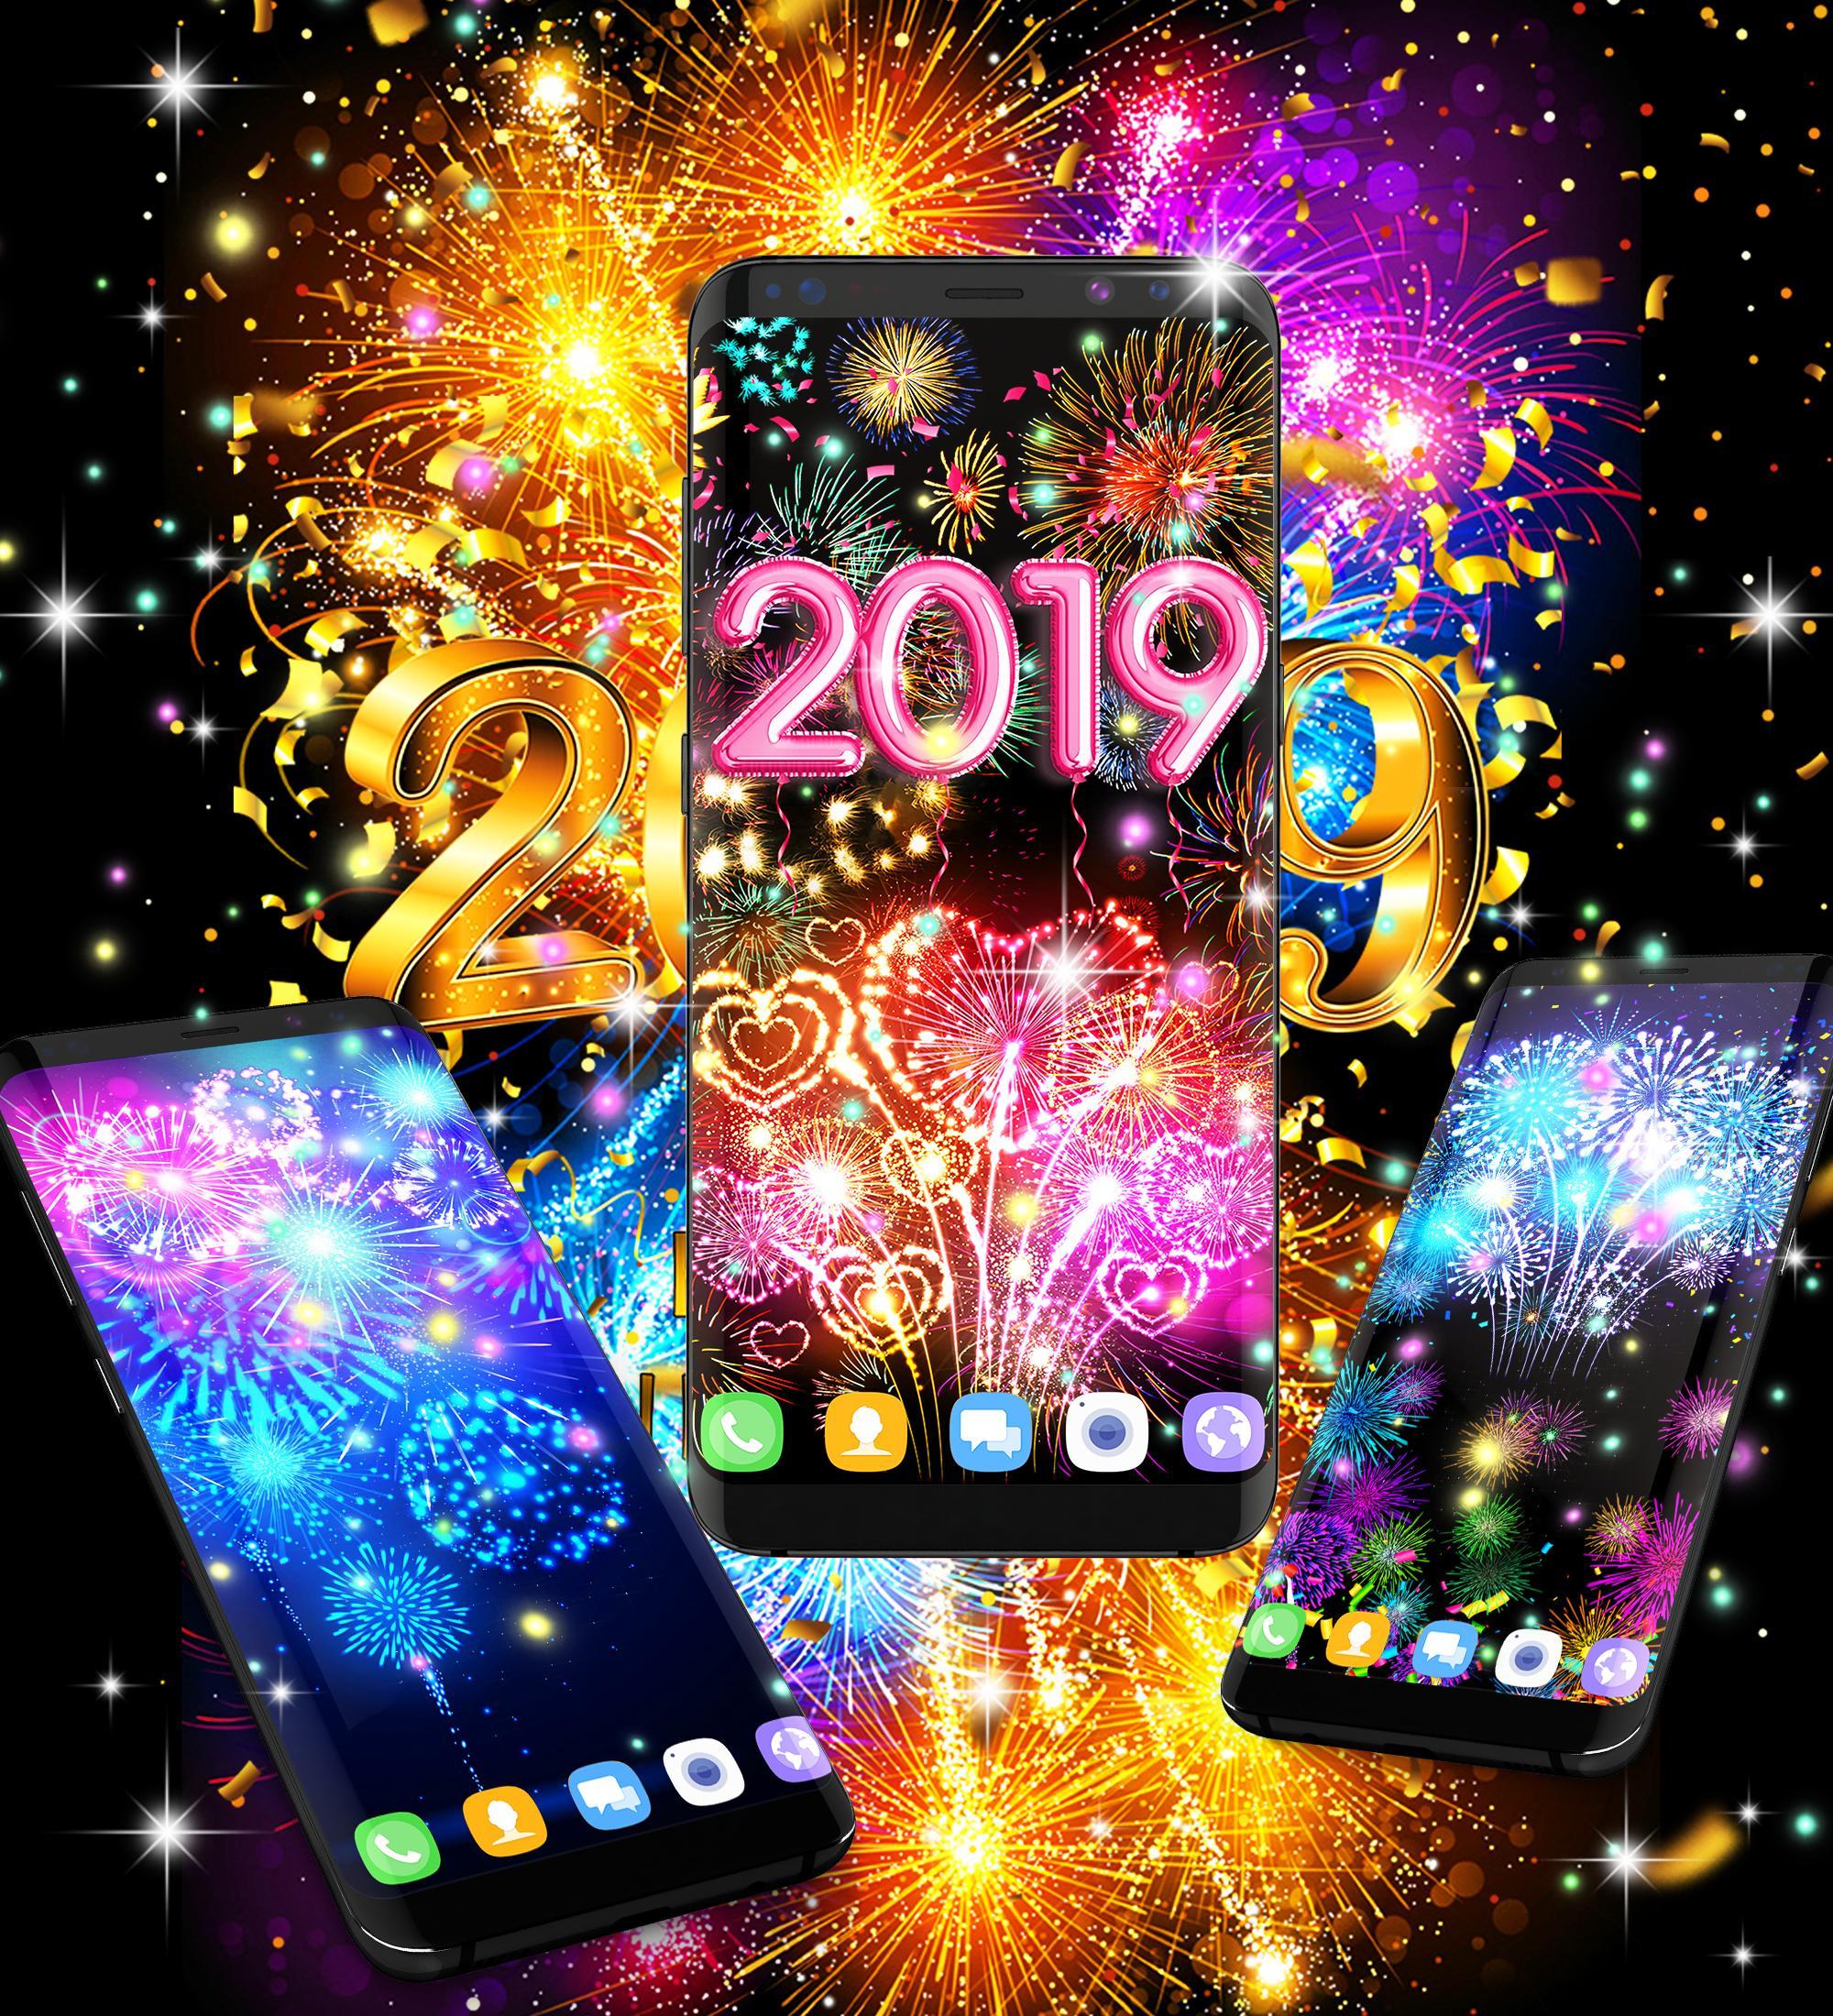 Happy new year 2021 live wallpaper for Android - APK Download